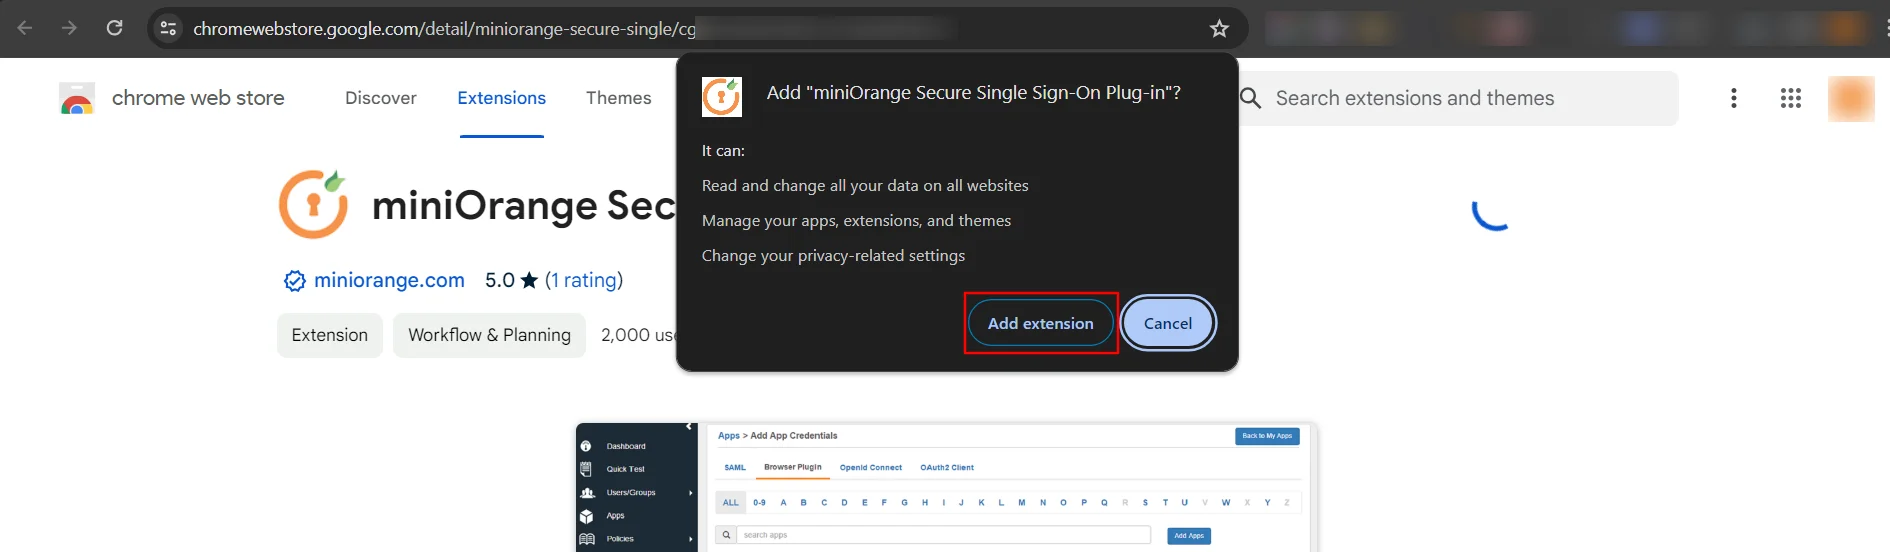 Google Search Console Single Sign-On (sso) extension added in chrome